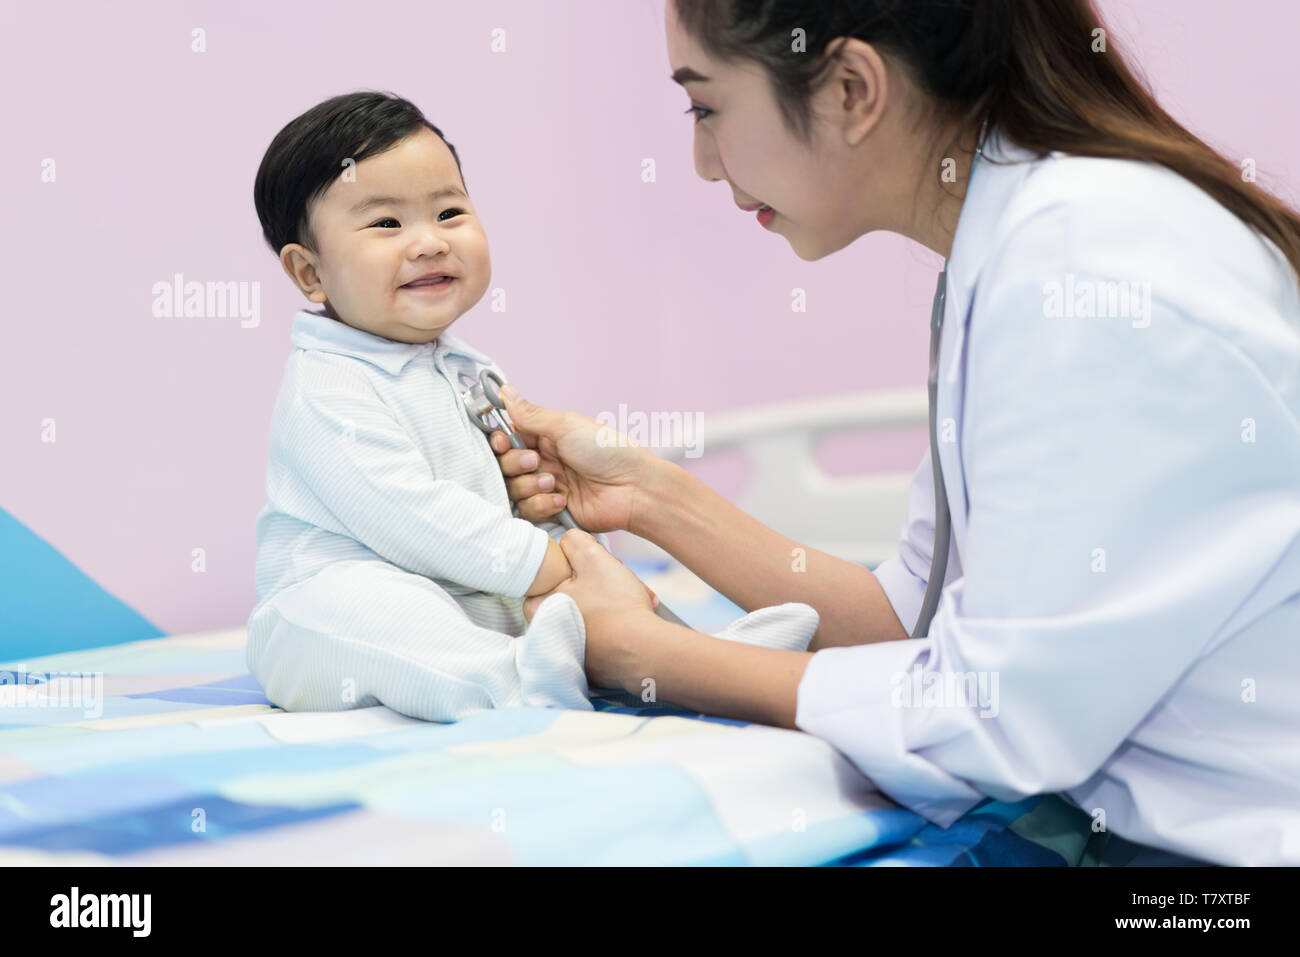 Asian doctor woman examining a little boy by stethoscope in hospital. Medicine and health care concept. Stock Photo